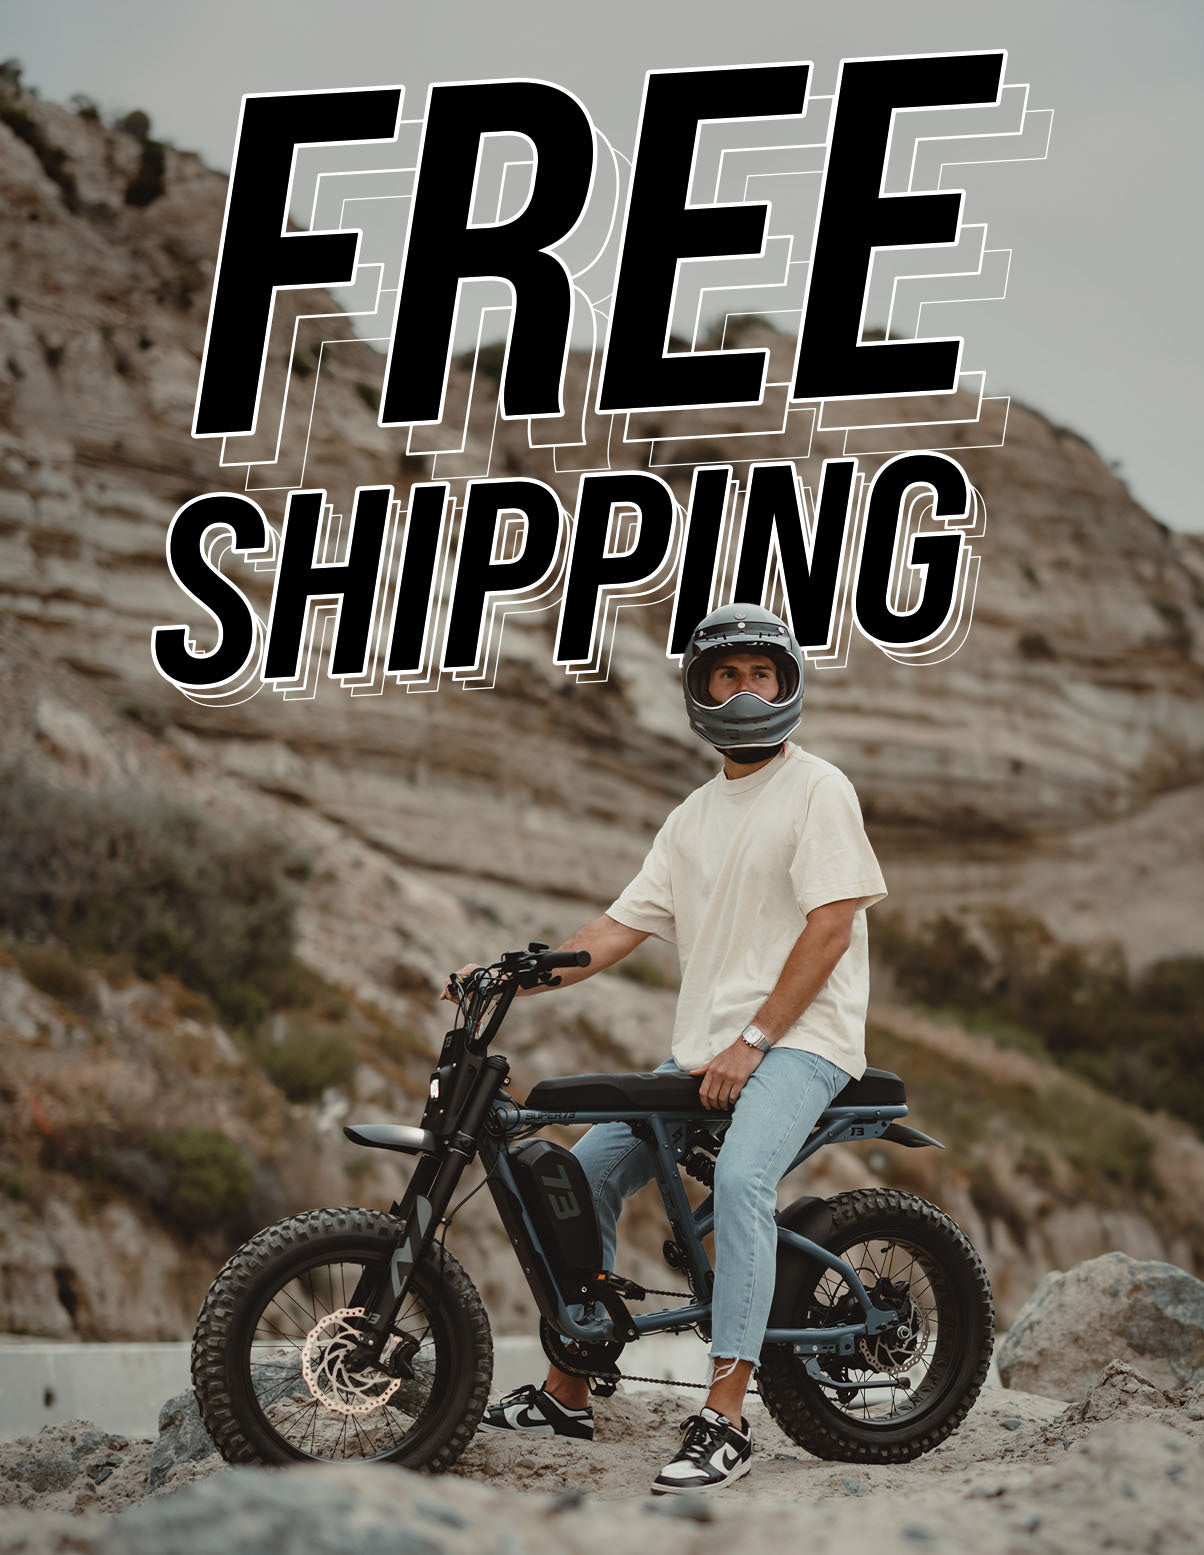 Free shipping promotion graphic